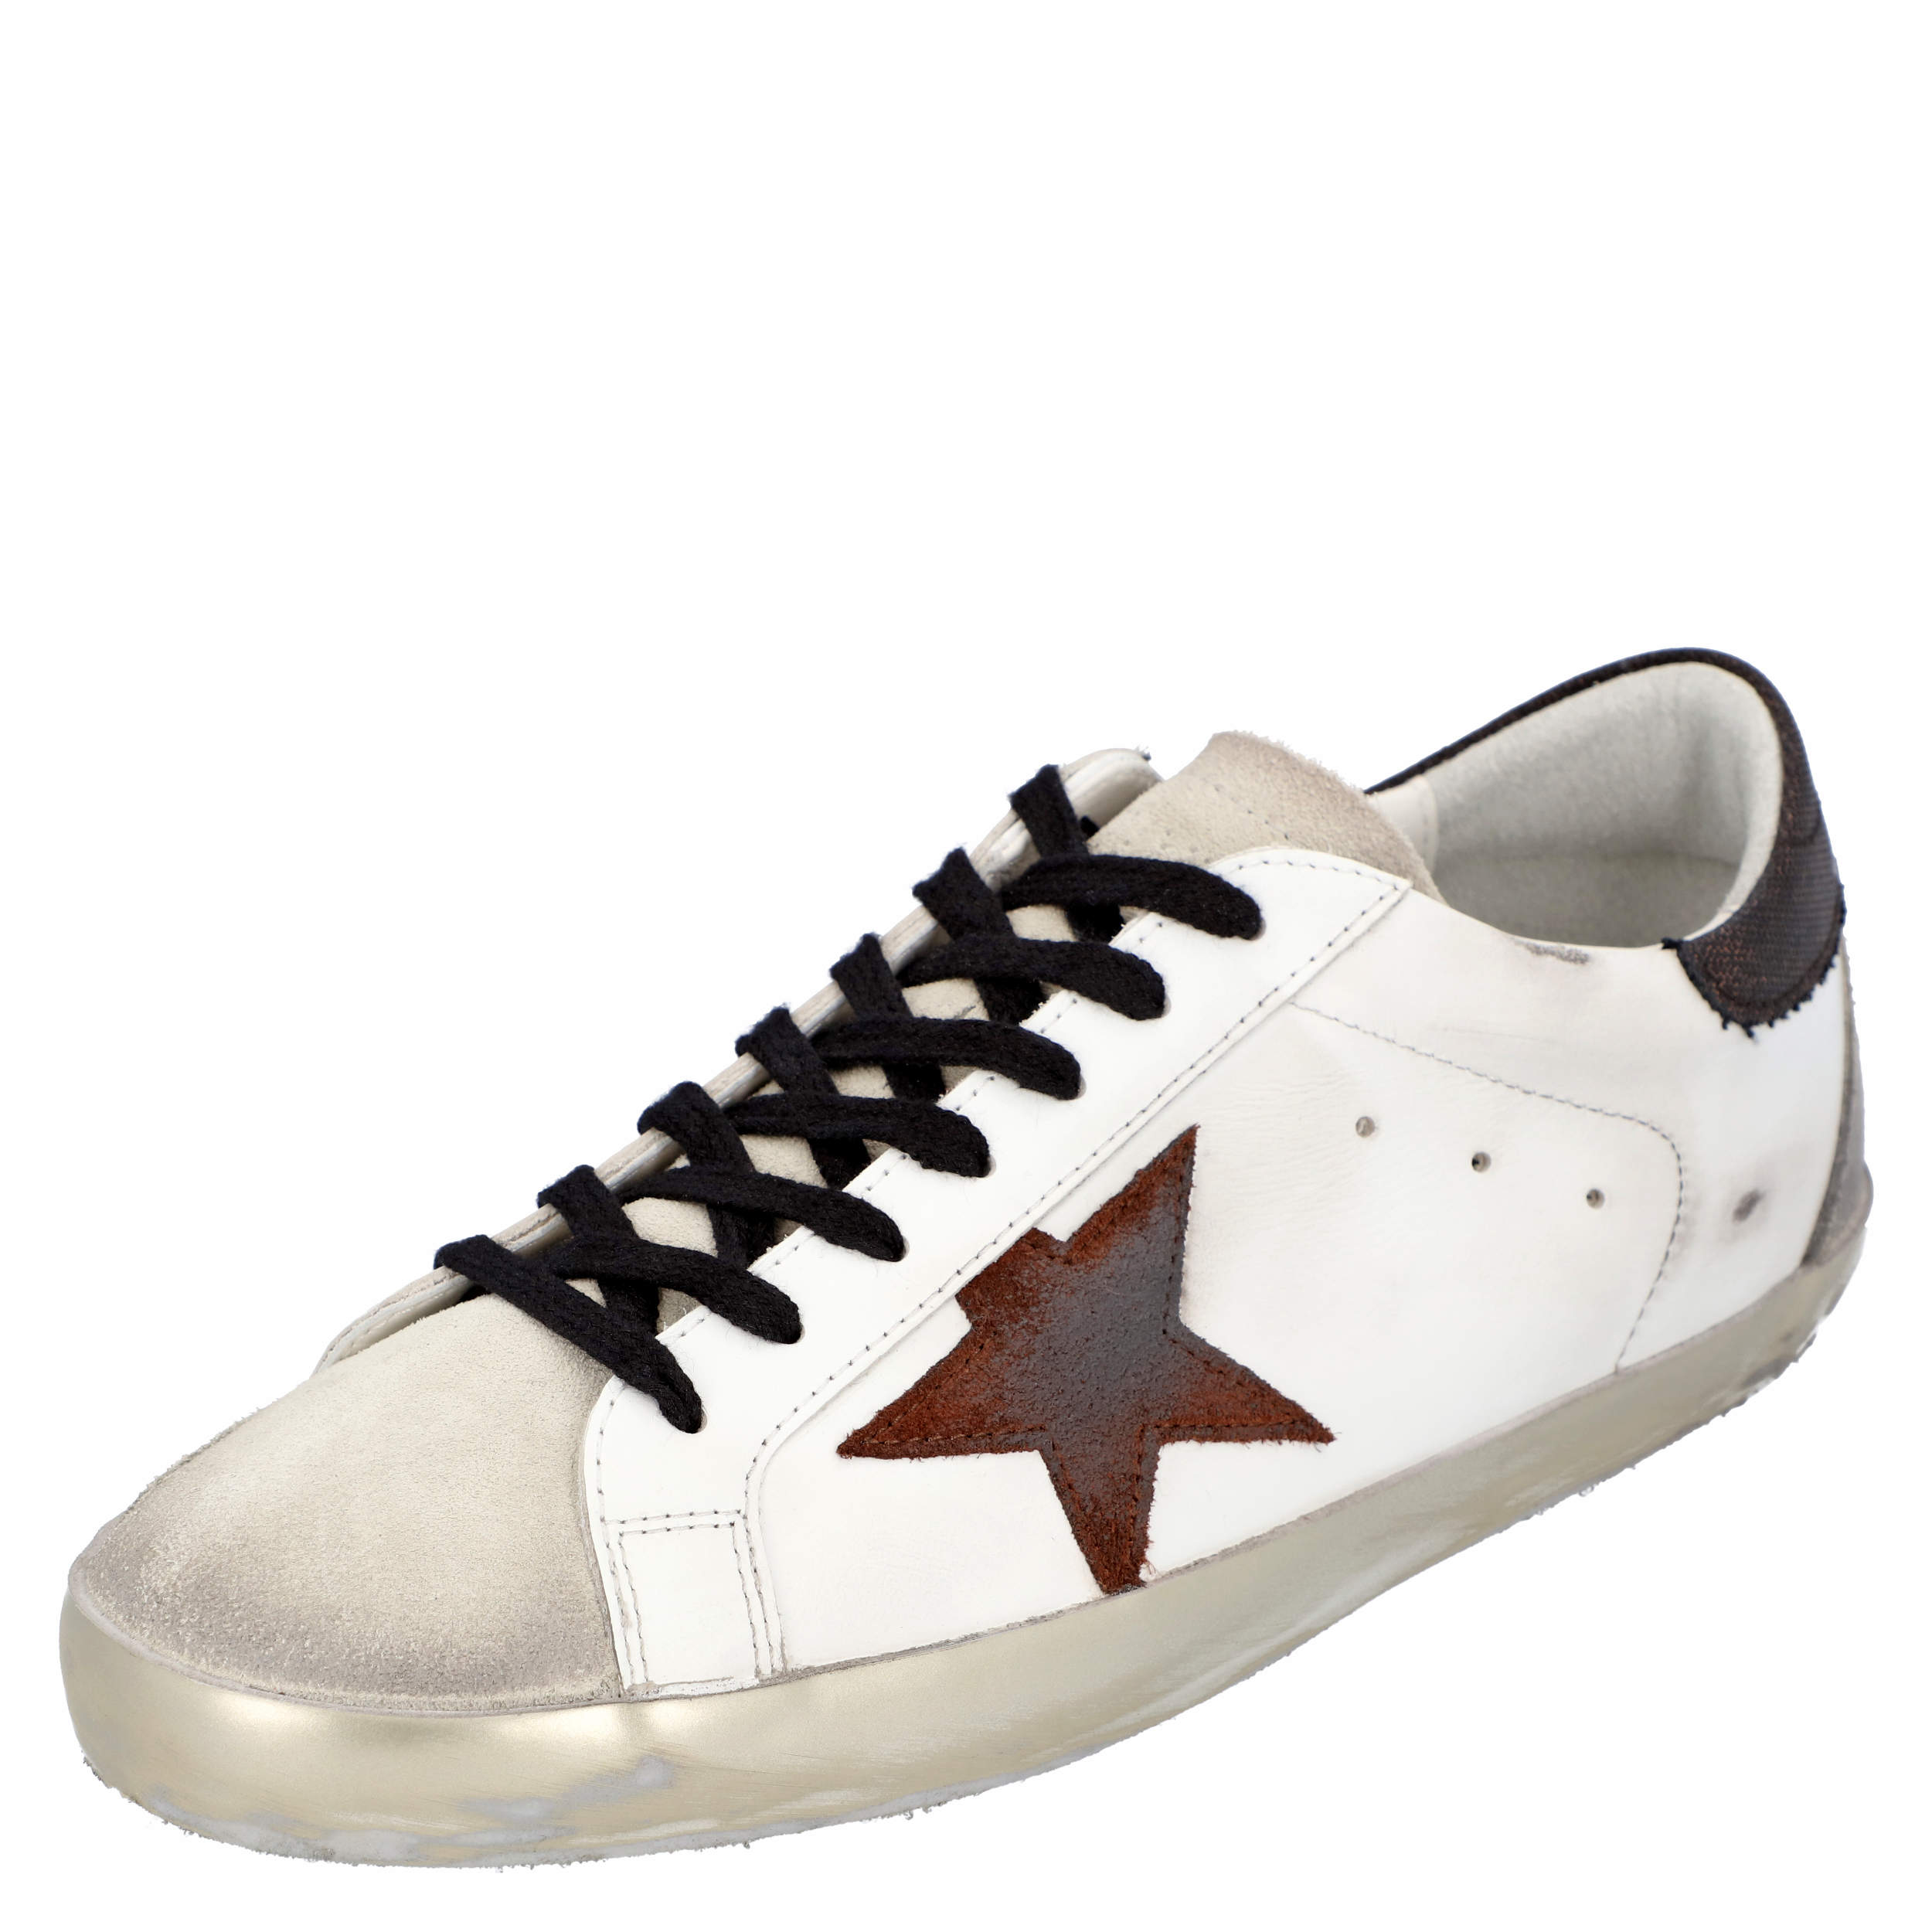 Golden Goose White/Black/Red Leather Superstar Sneakers Size EU 41